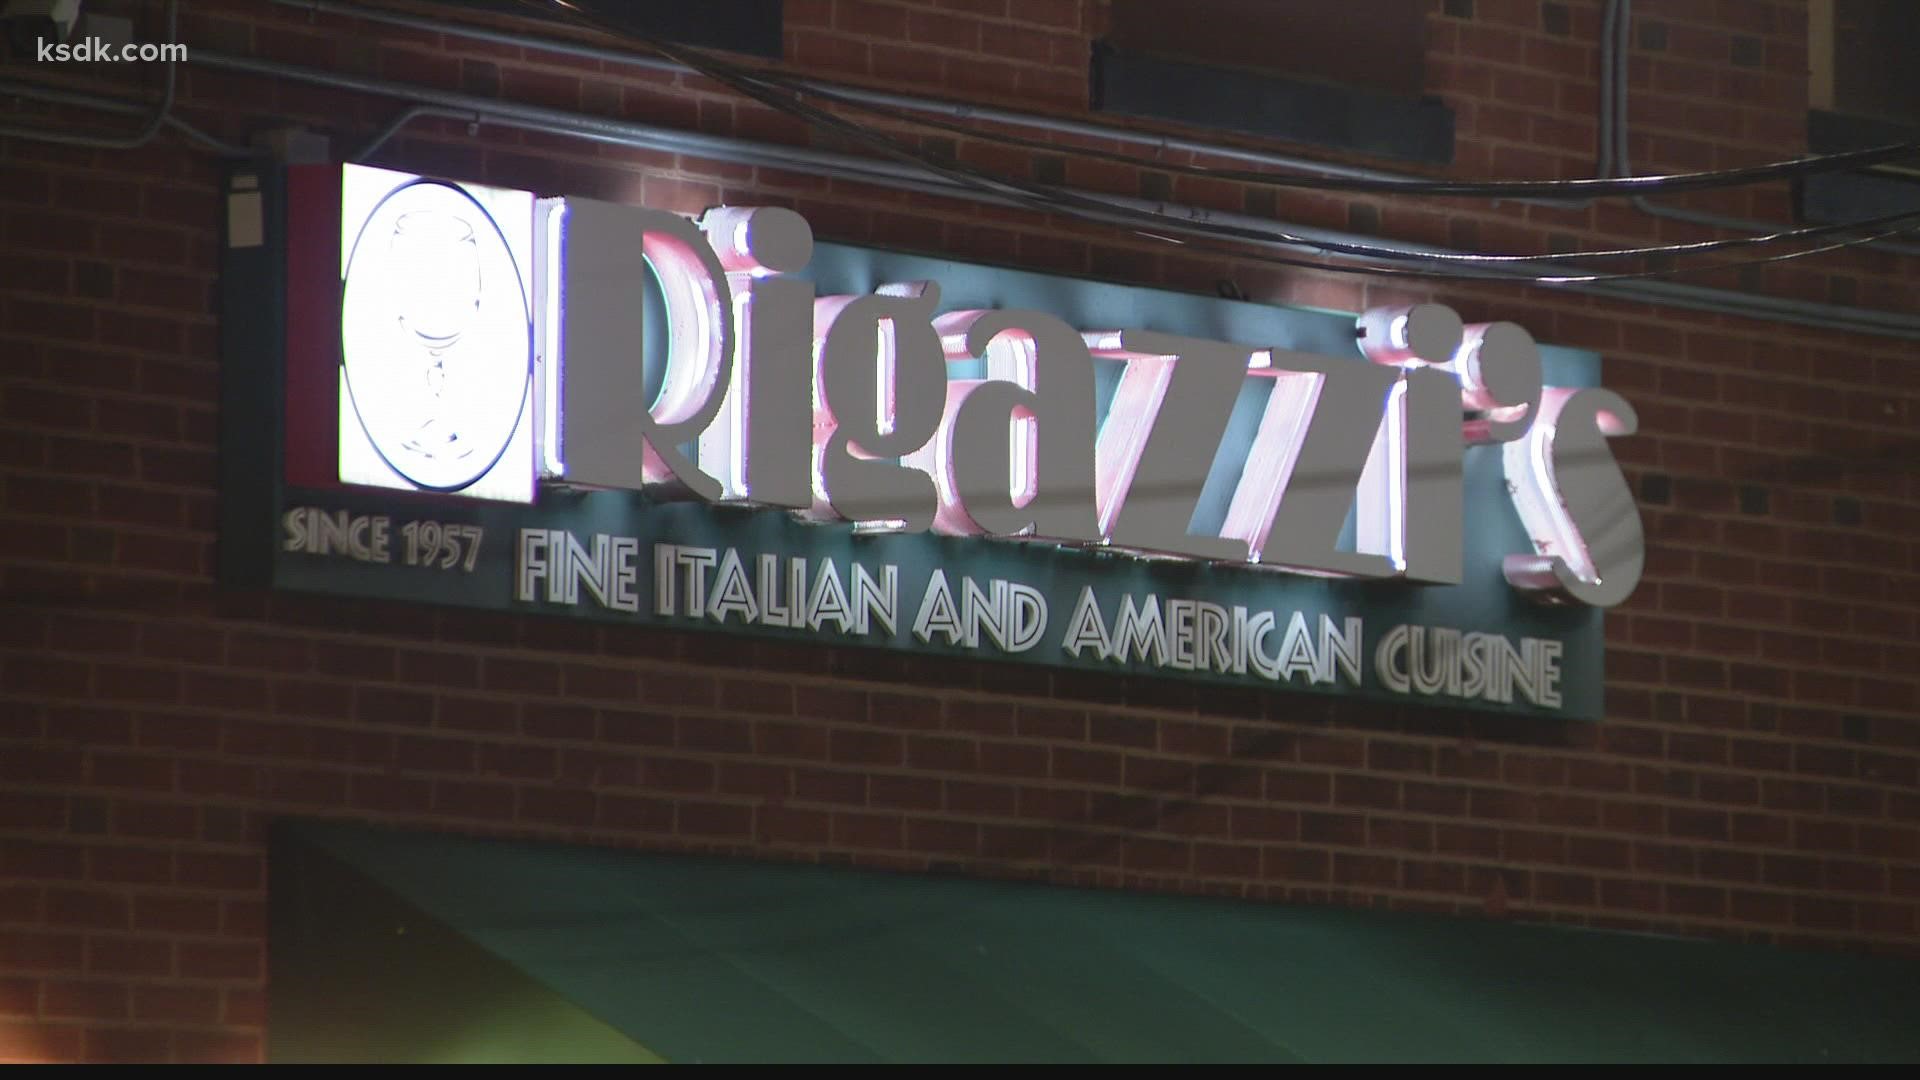 Police found an employee of Rigazzi’s shot multiple times in the kitchen